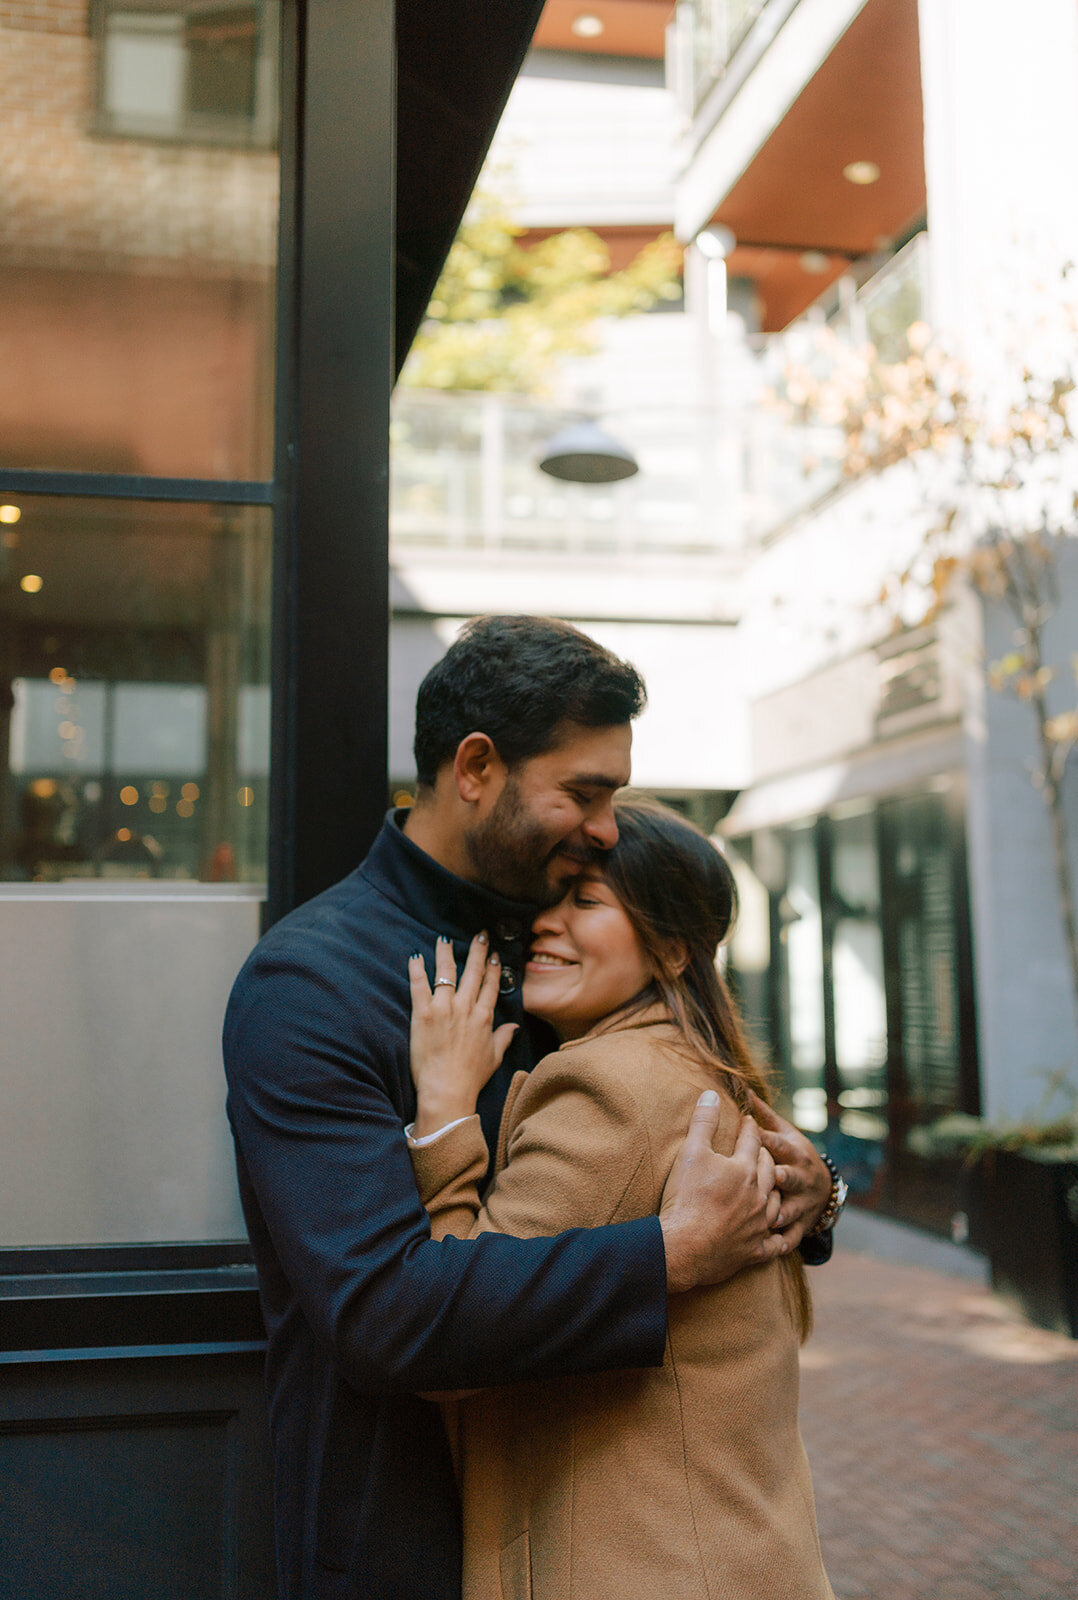 Janeth-Edgar-Gastown-Vancouver-Classy-Engagement-Session-120_websize